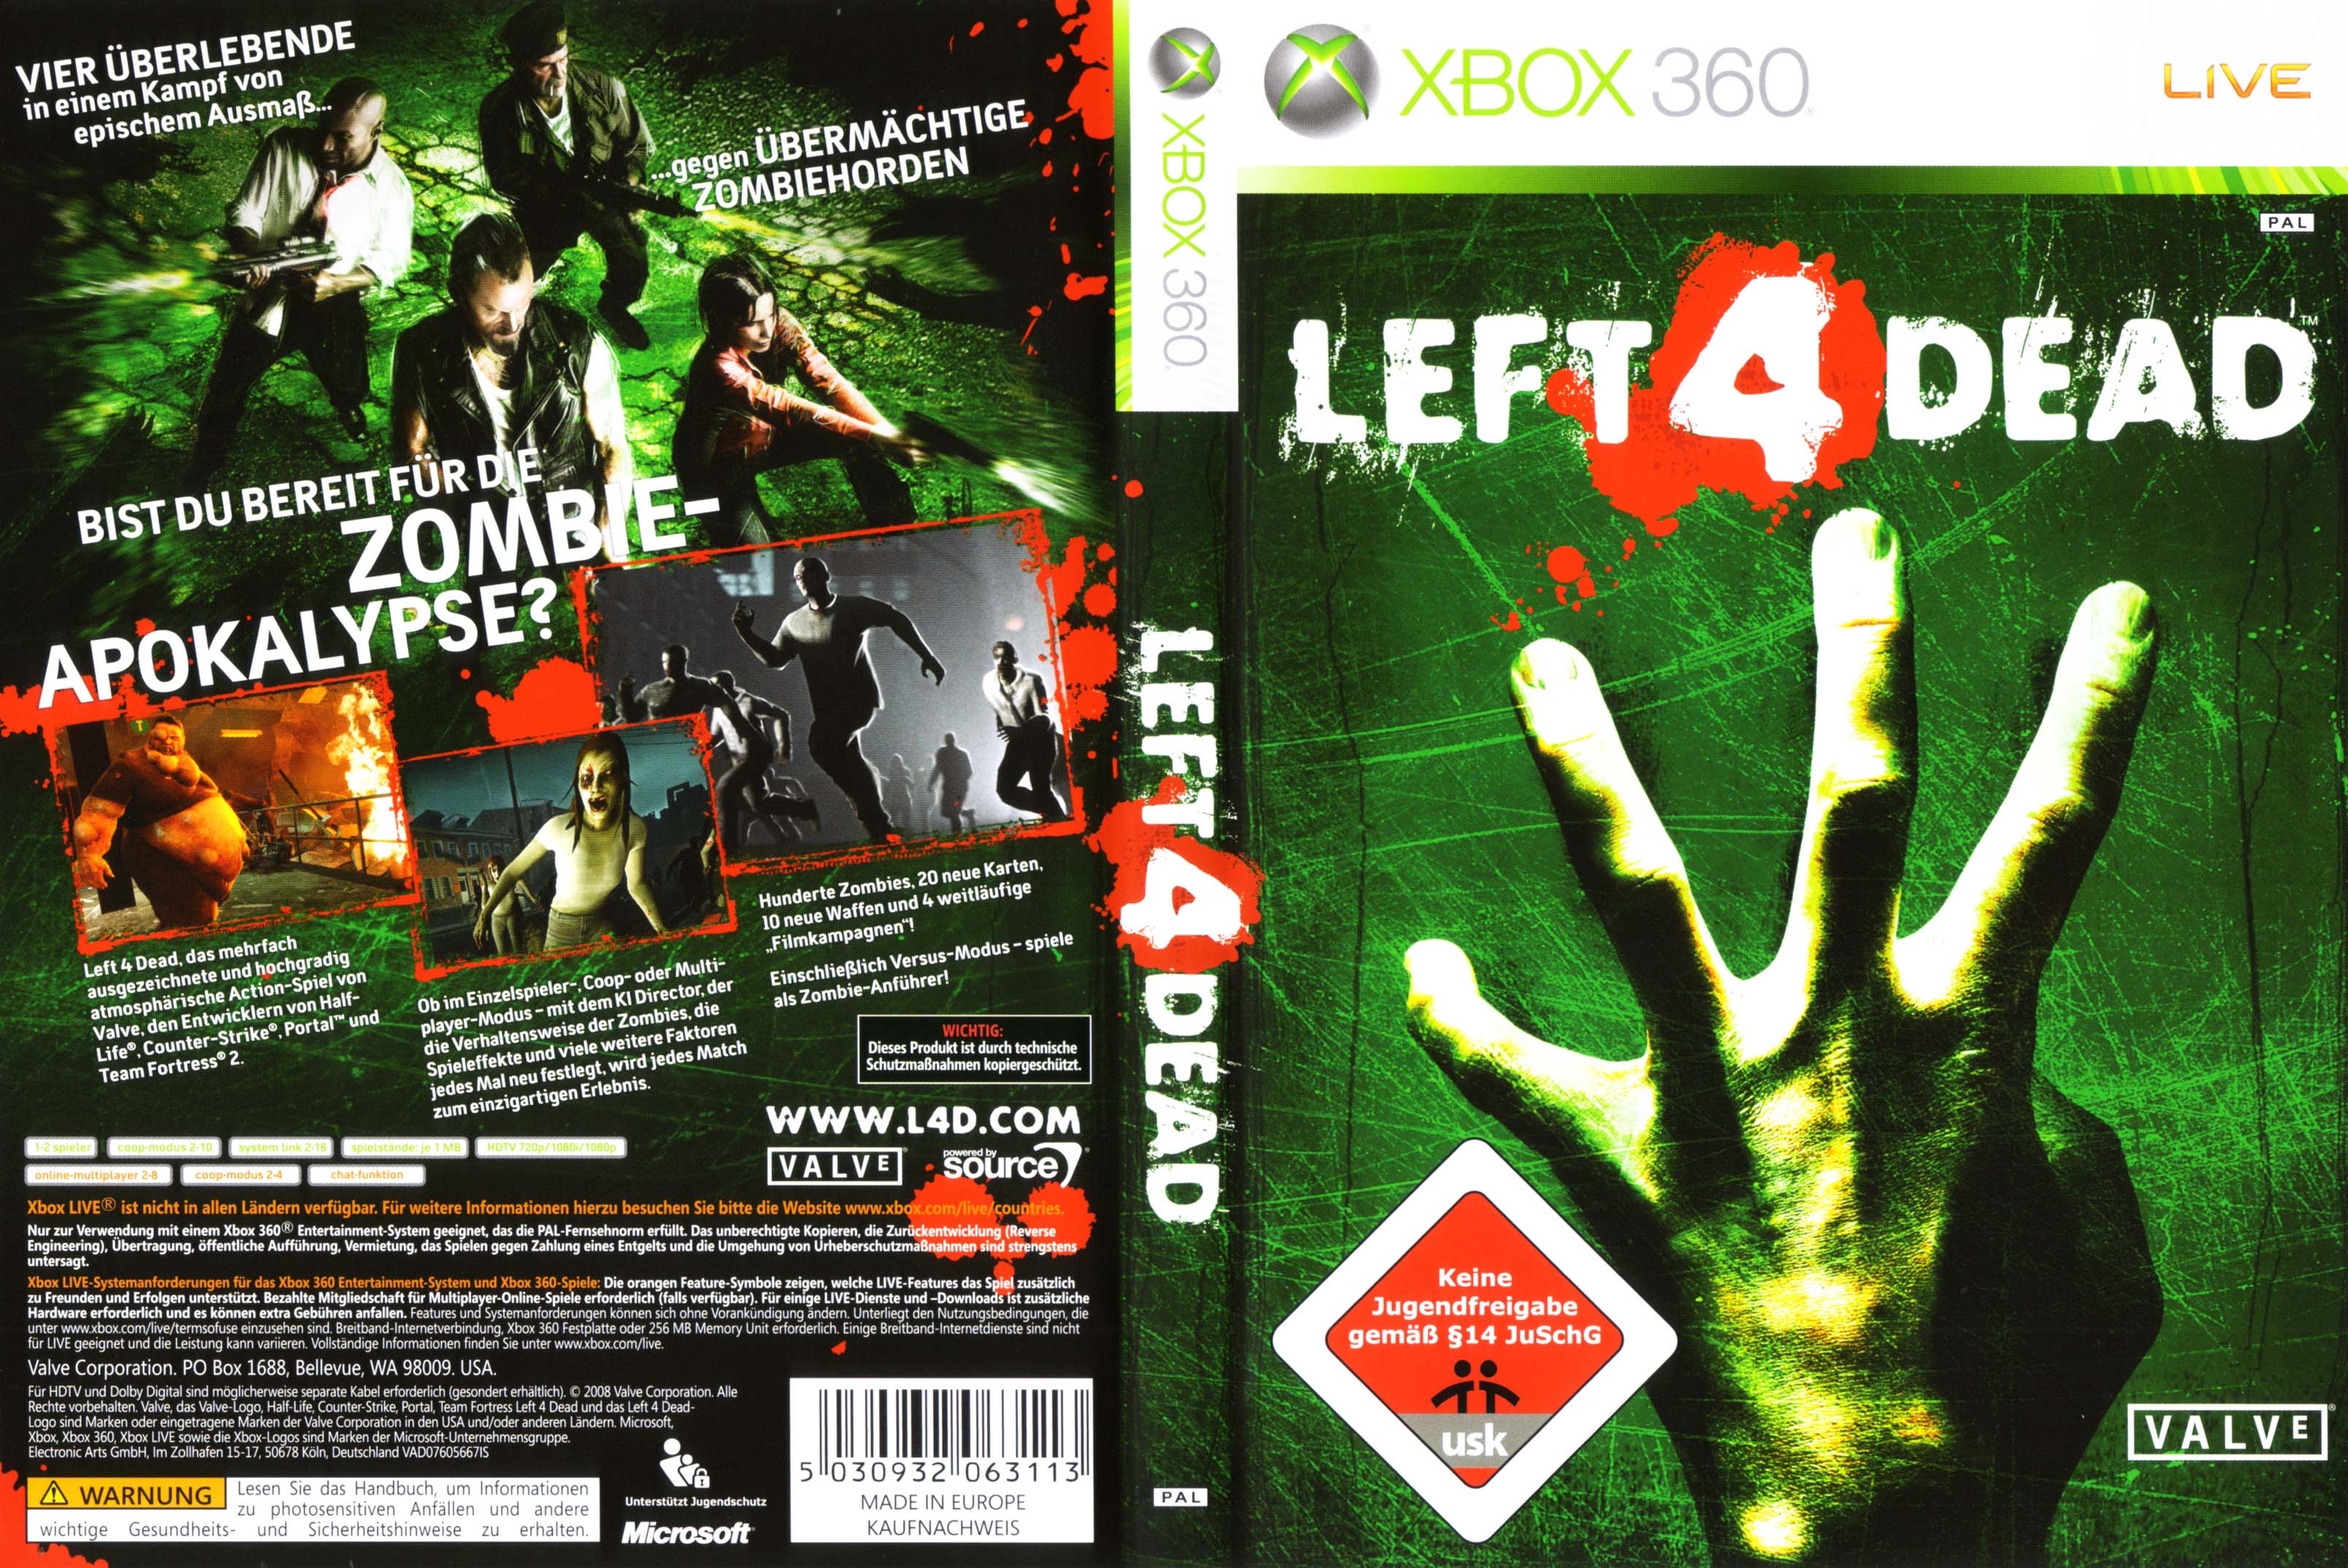 Left 4 Dead is a series of cooperative first-person shooter survival horror video games published by Valve.